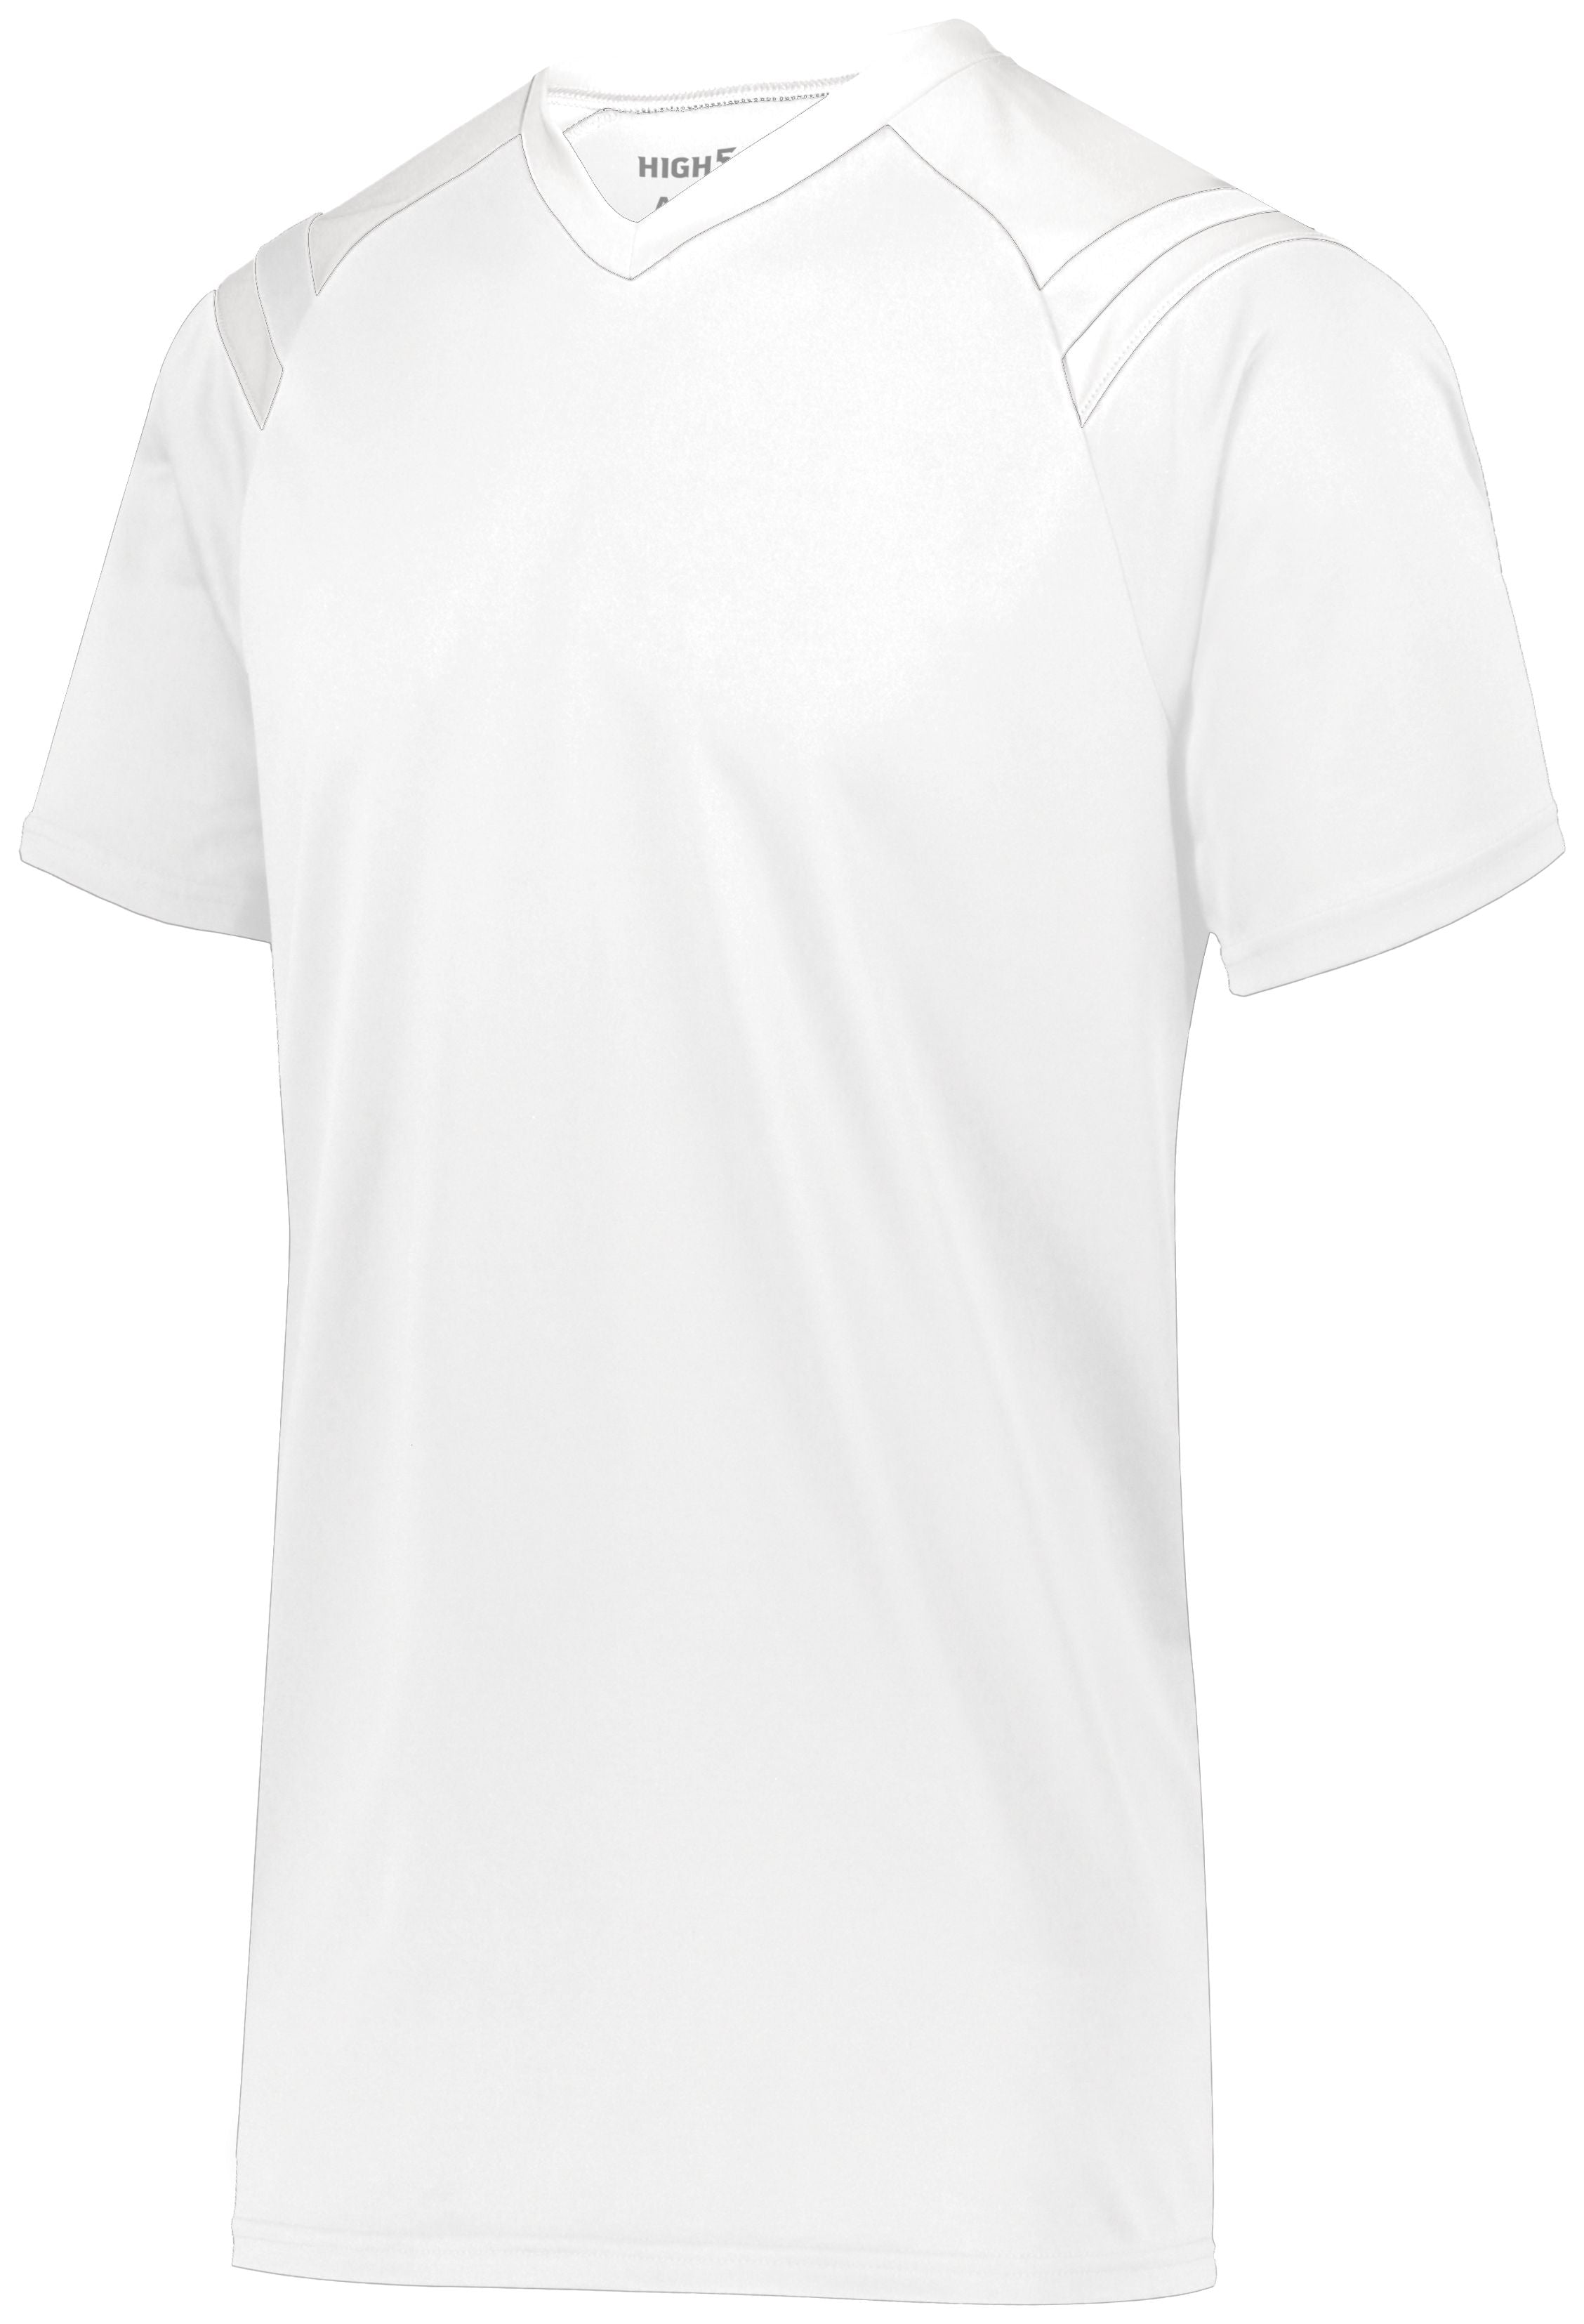 High 5 Sheffield Jersey in White  -Part of the Adult, Adult-Jersey, High5-Products, Soccer, Shirts, All-Sports-1, Sheffield-Soccer-Jerseys product lines at KanaleyCreations.com